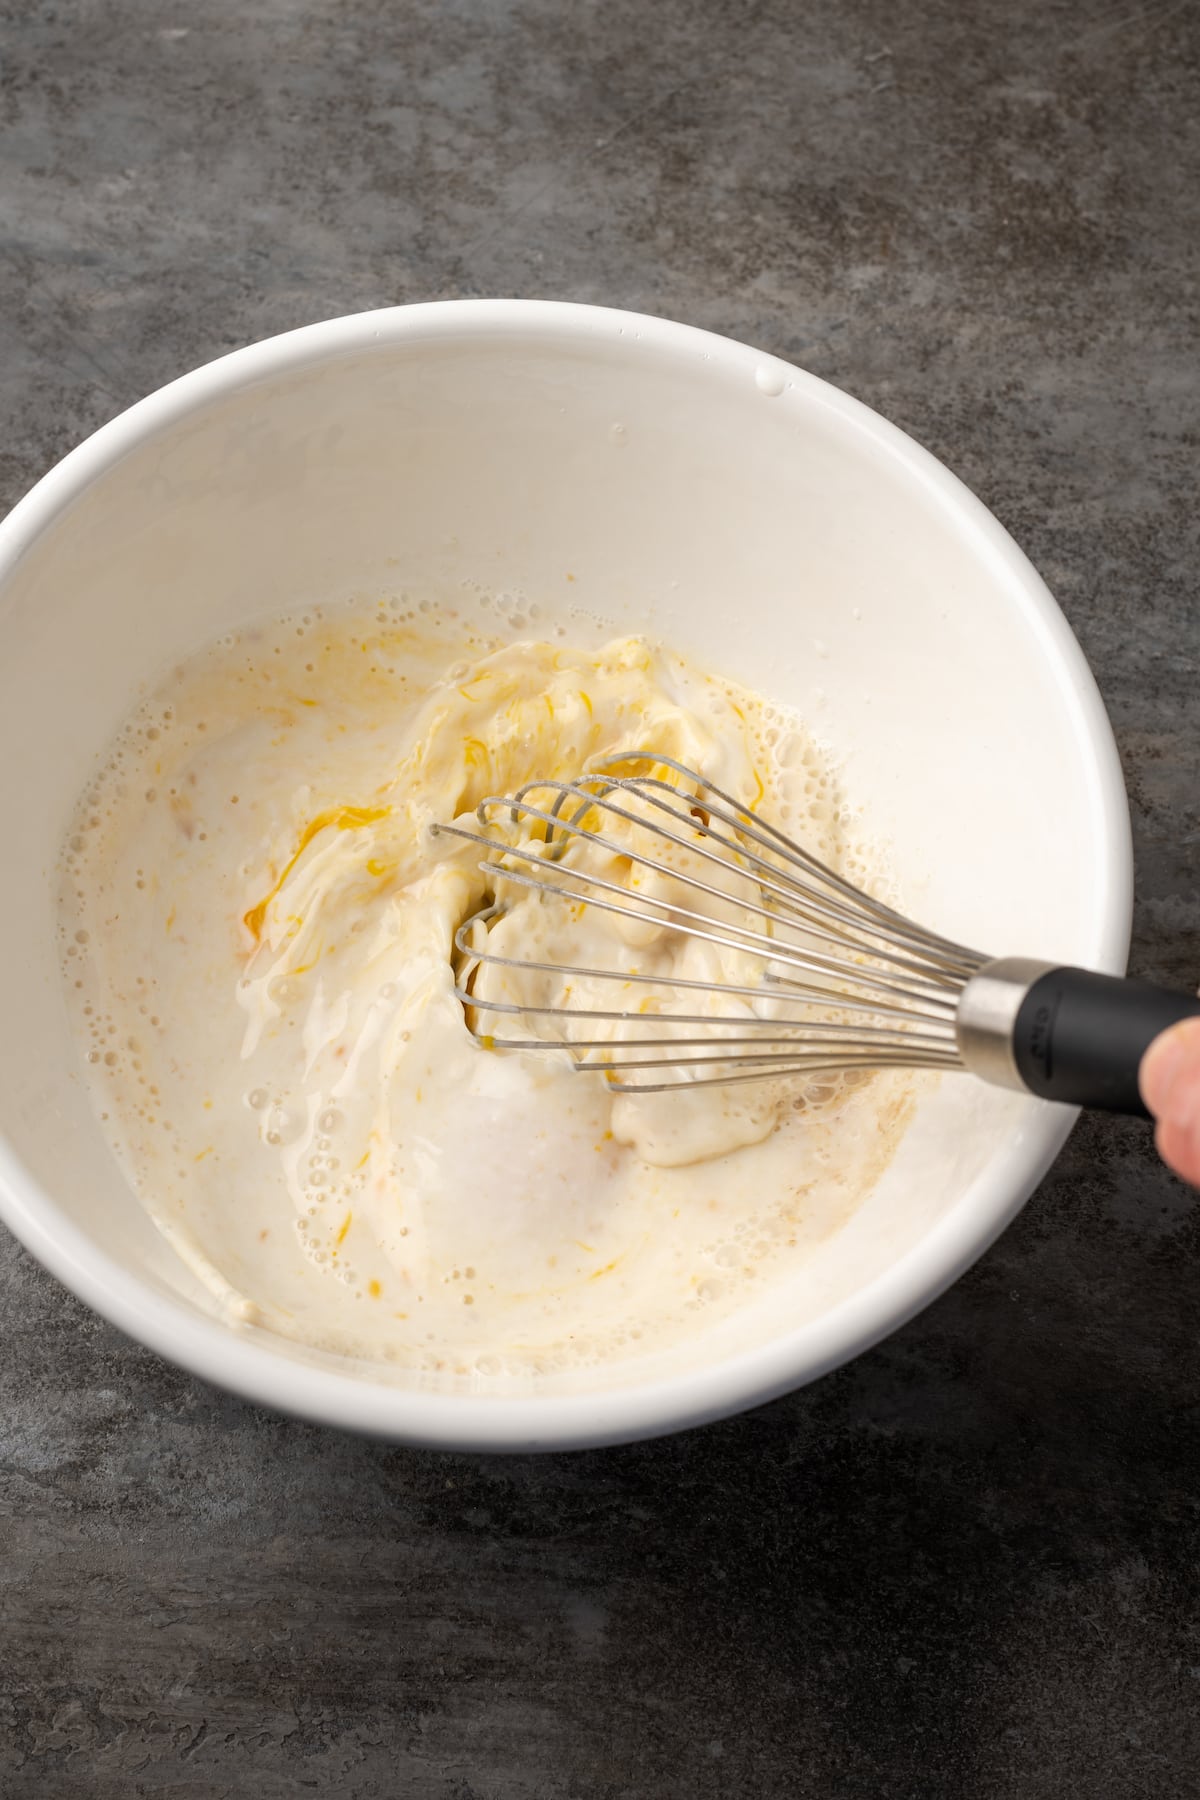 Wet ingredients are whisked together in a mixing bowl.